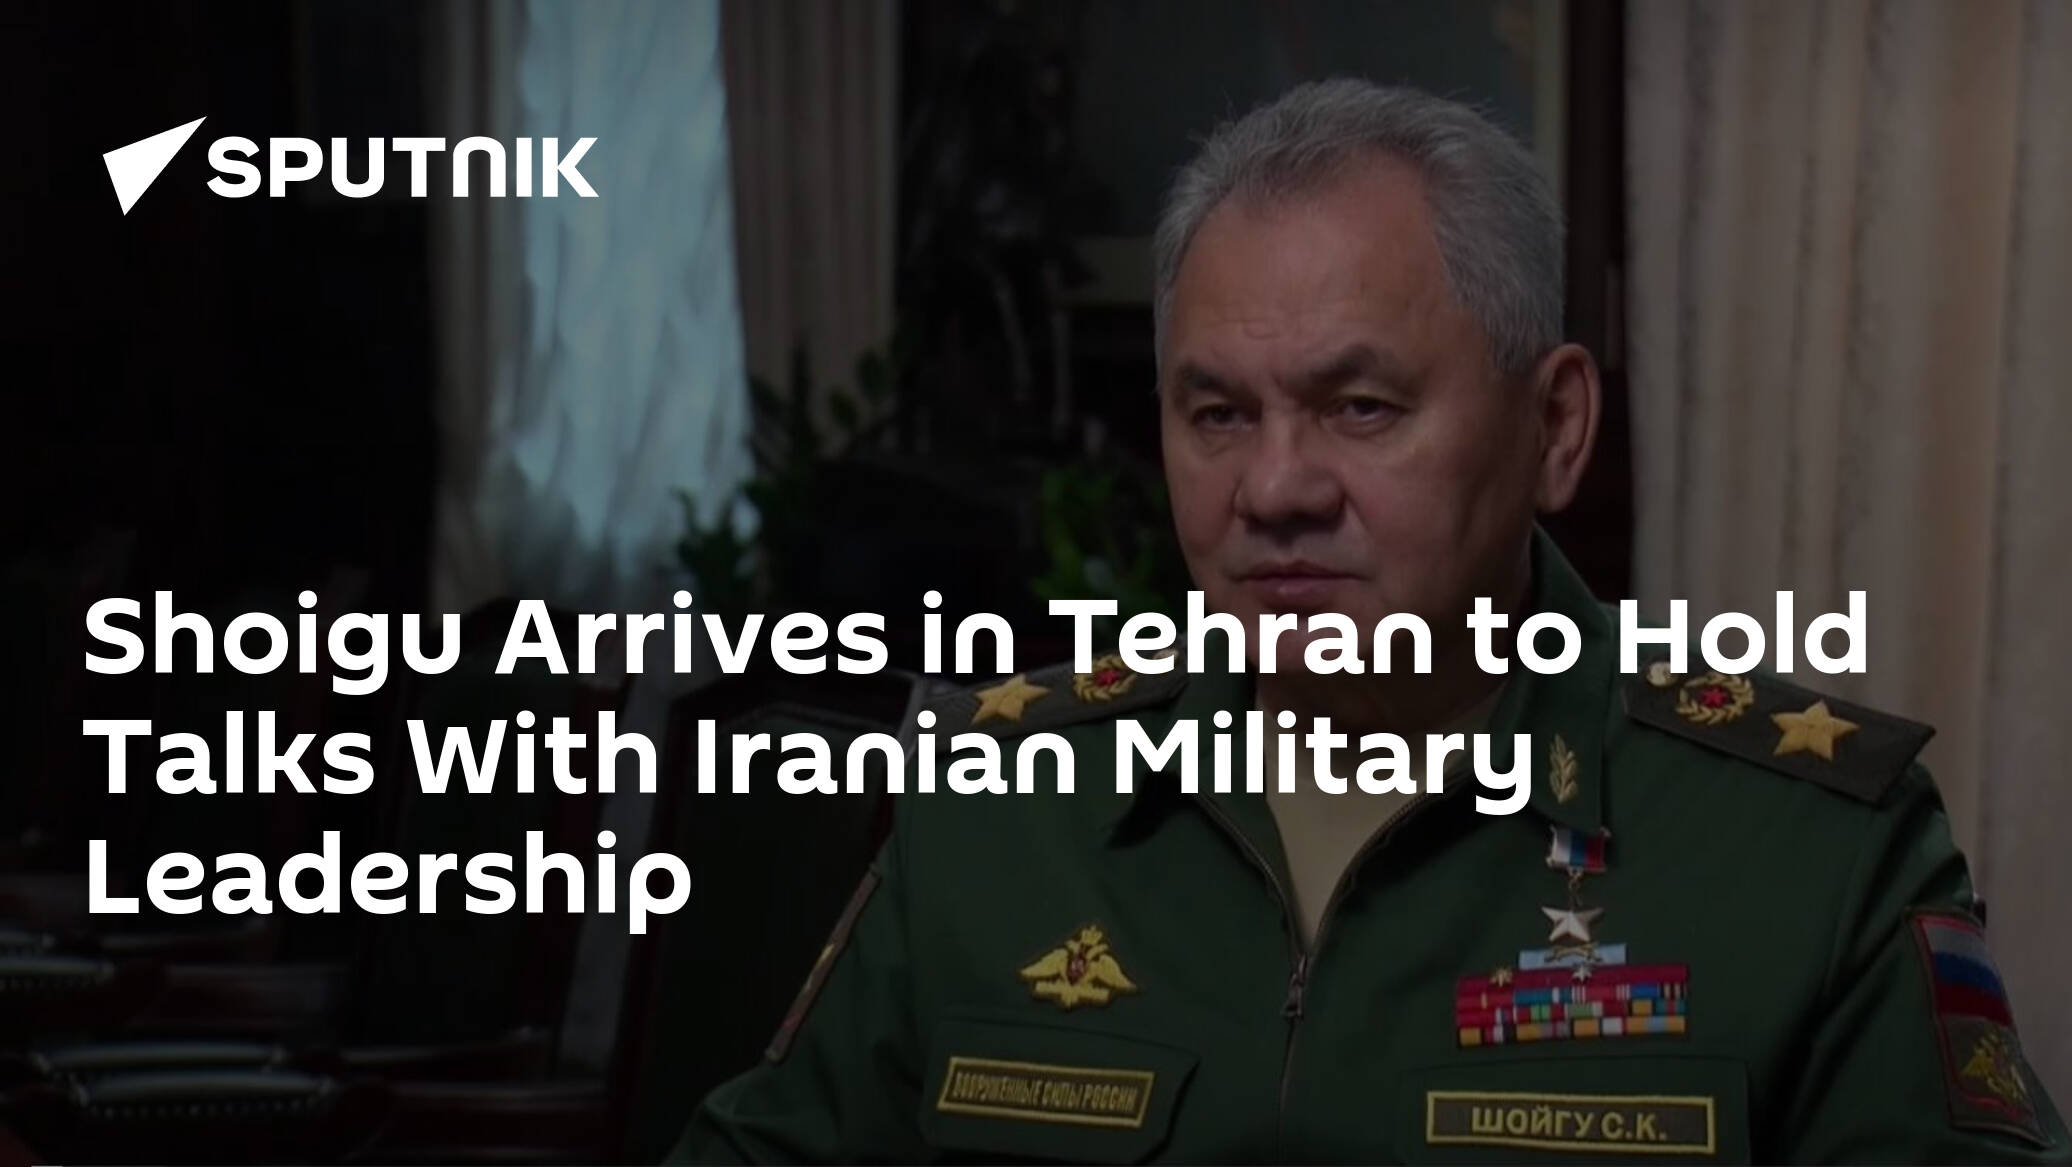 Shoigu Arrives in Tehran to Hold Talks With Iranian Military Leadership